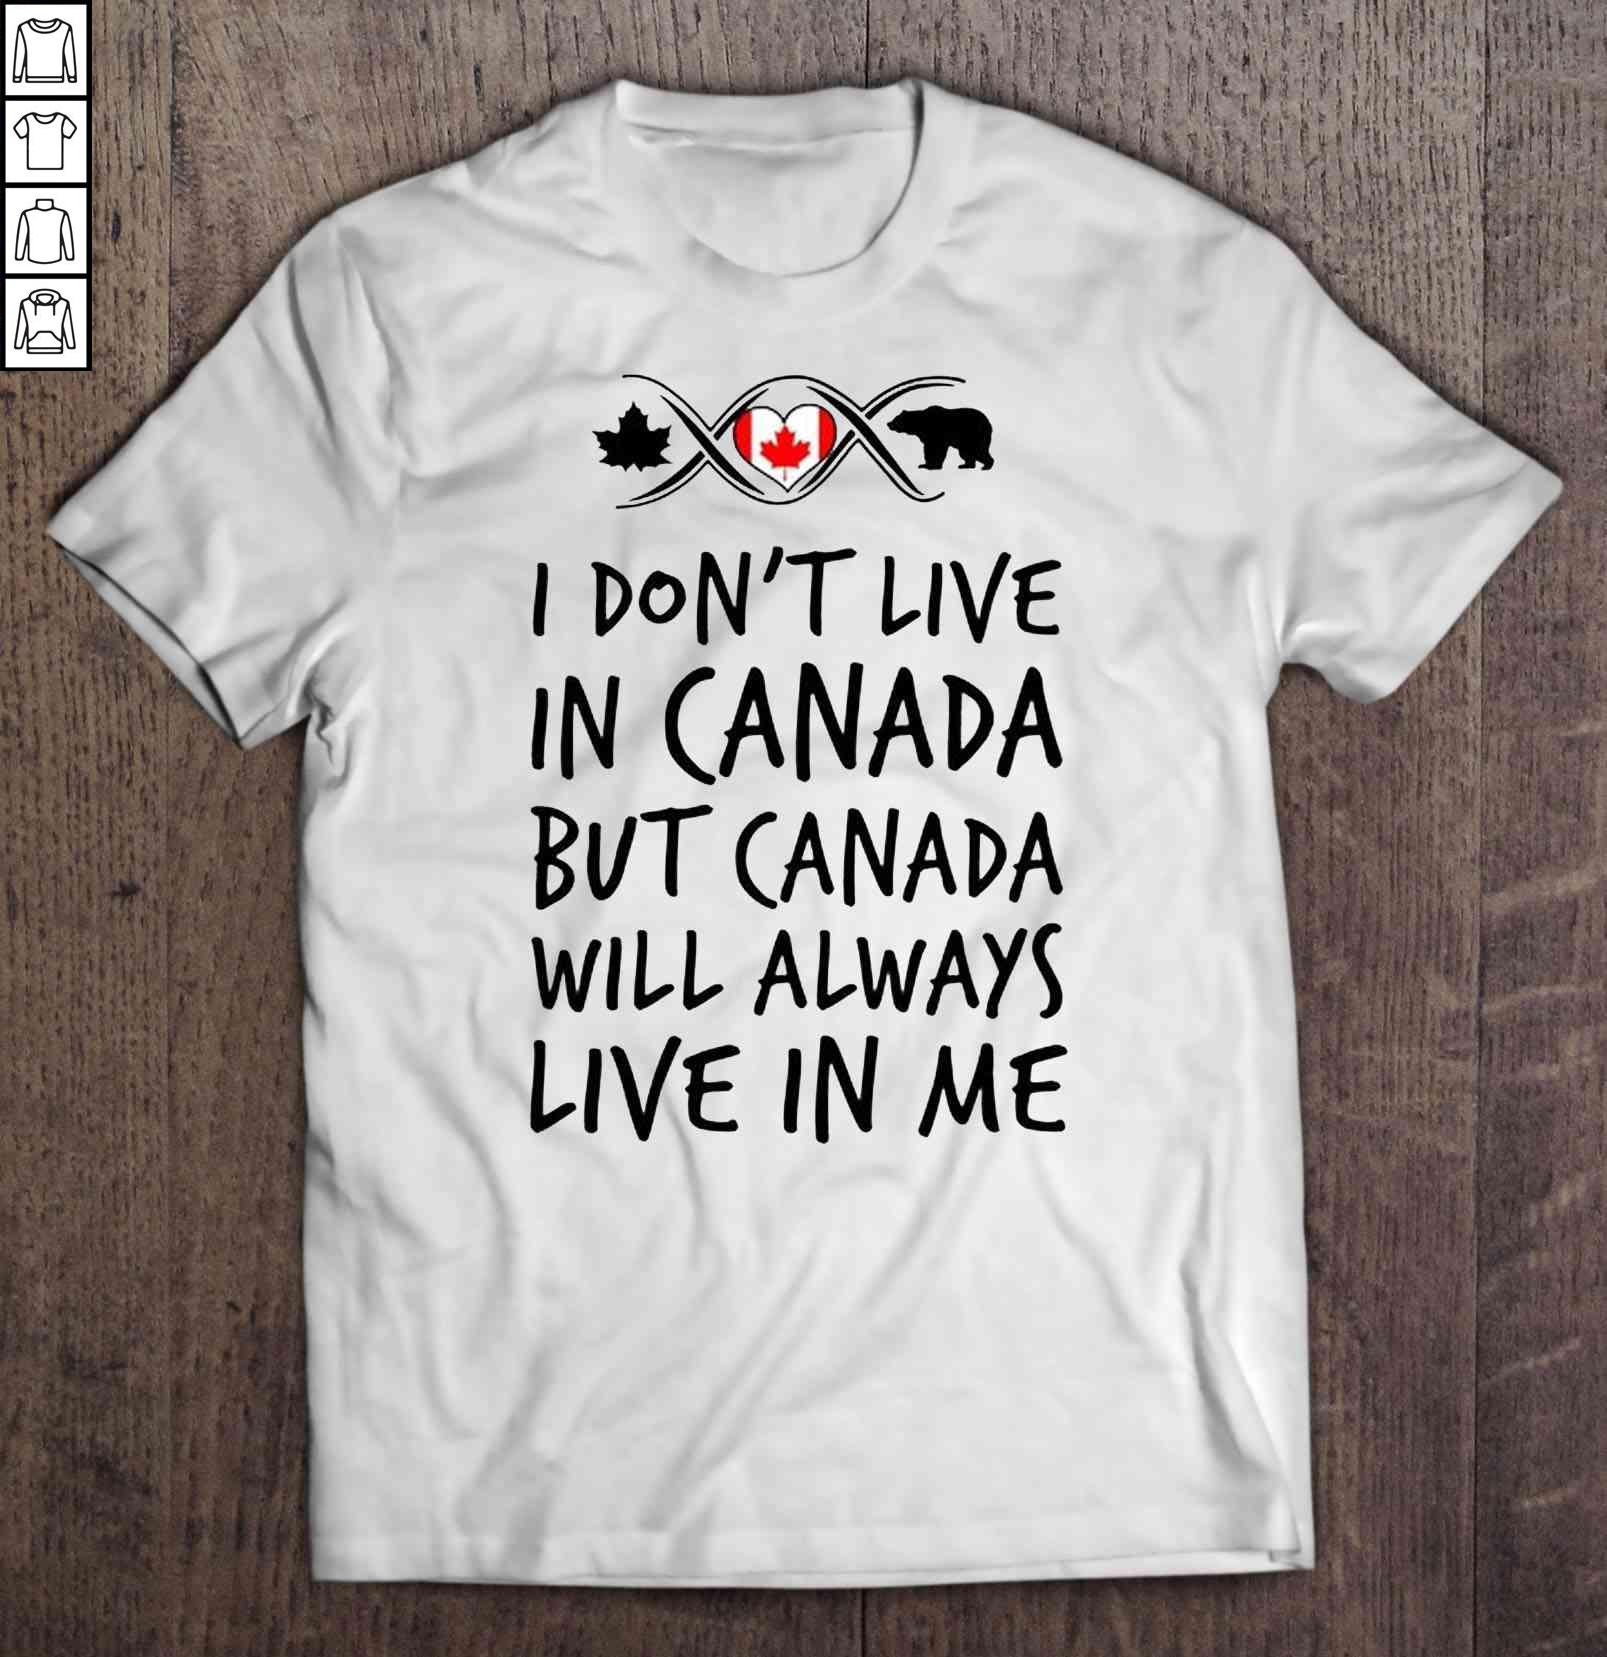 I Don’t Live In Canada But Canada Will Always Live In Me White Tee T-Shirt